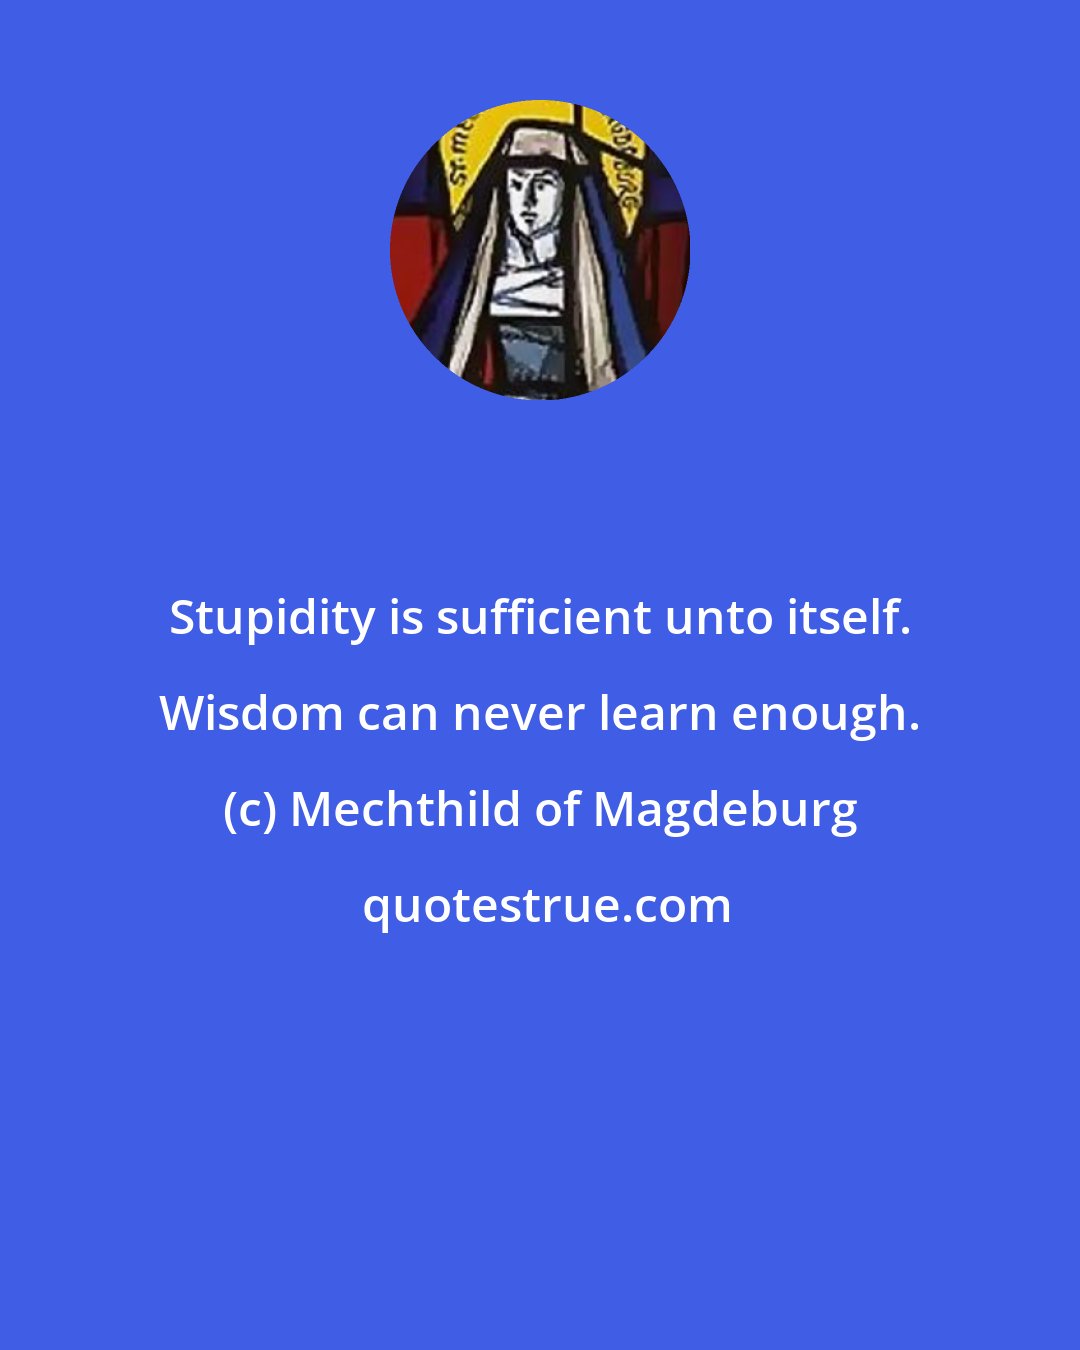 Mechthild of Magdeburg: Stupidity is sufficient unto itself. Wisdom can never learn enough.